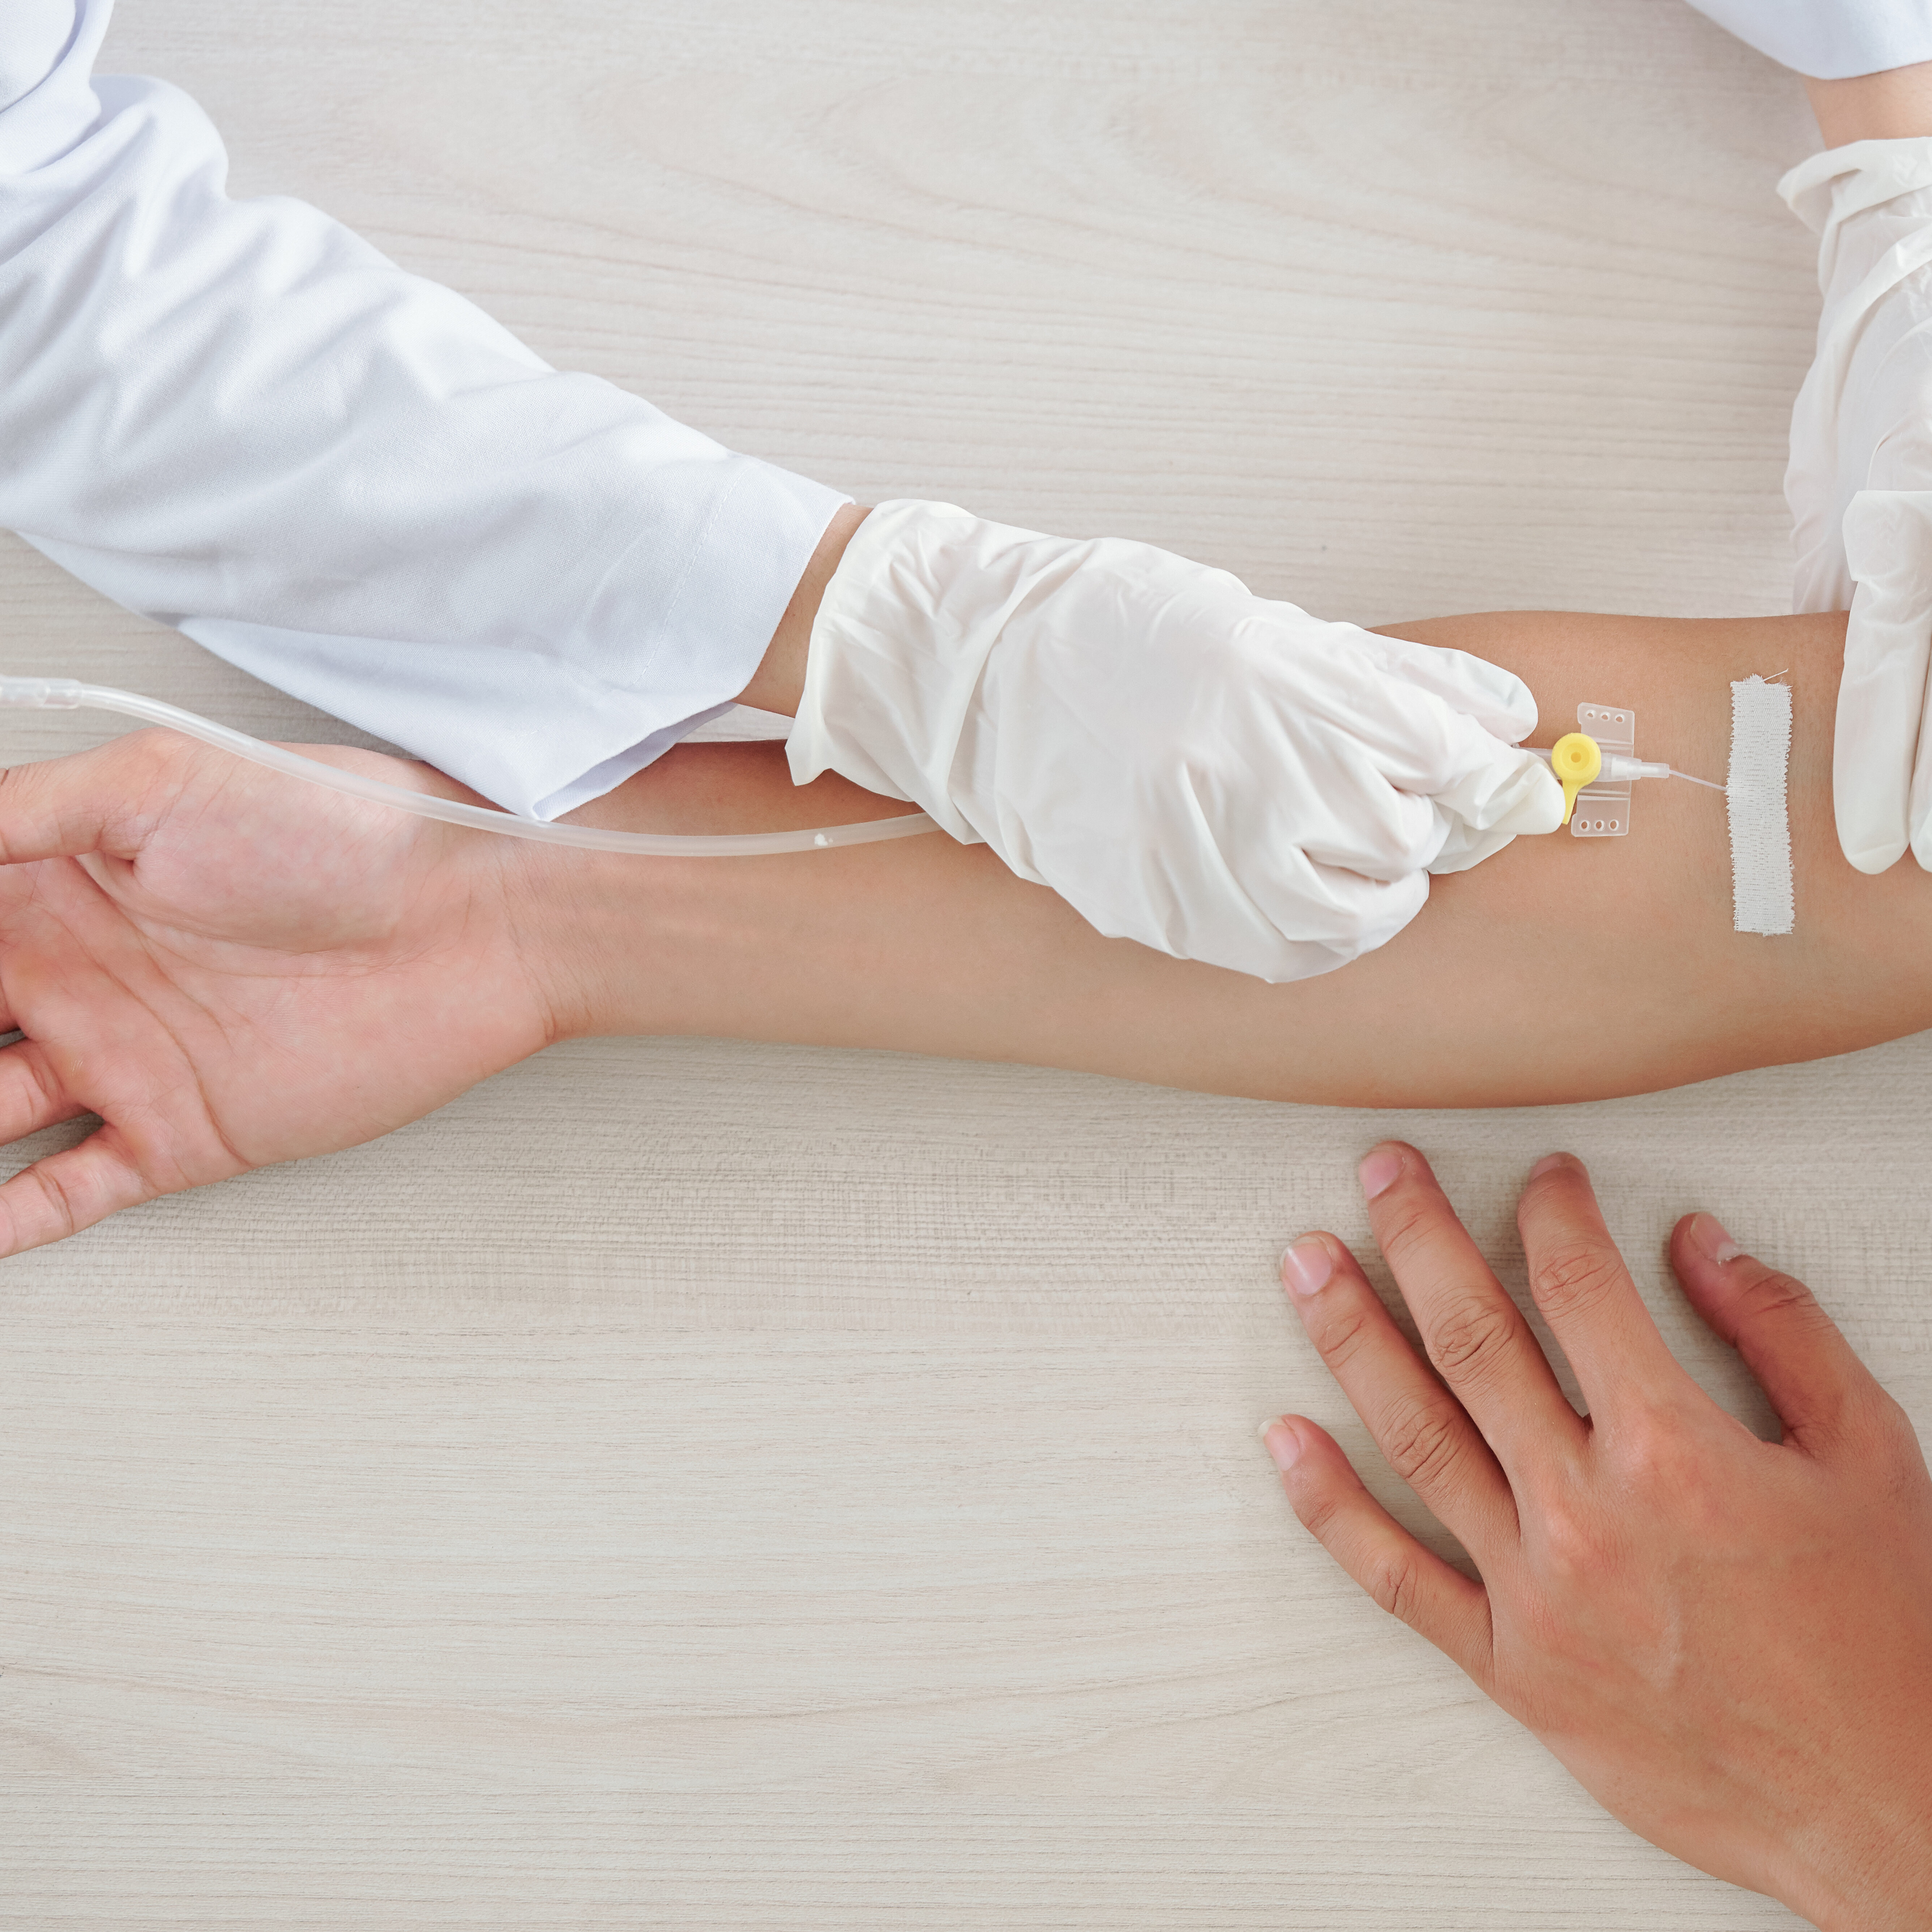 A medical provider administers specialty medications to a member through an IV